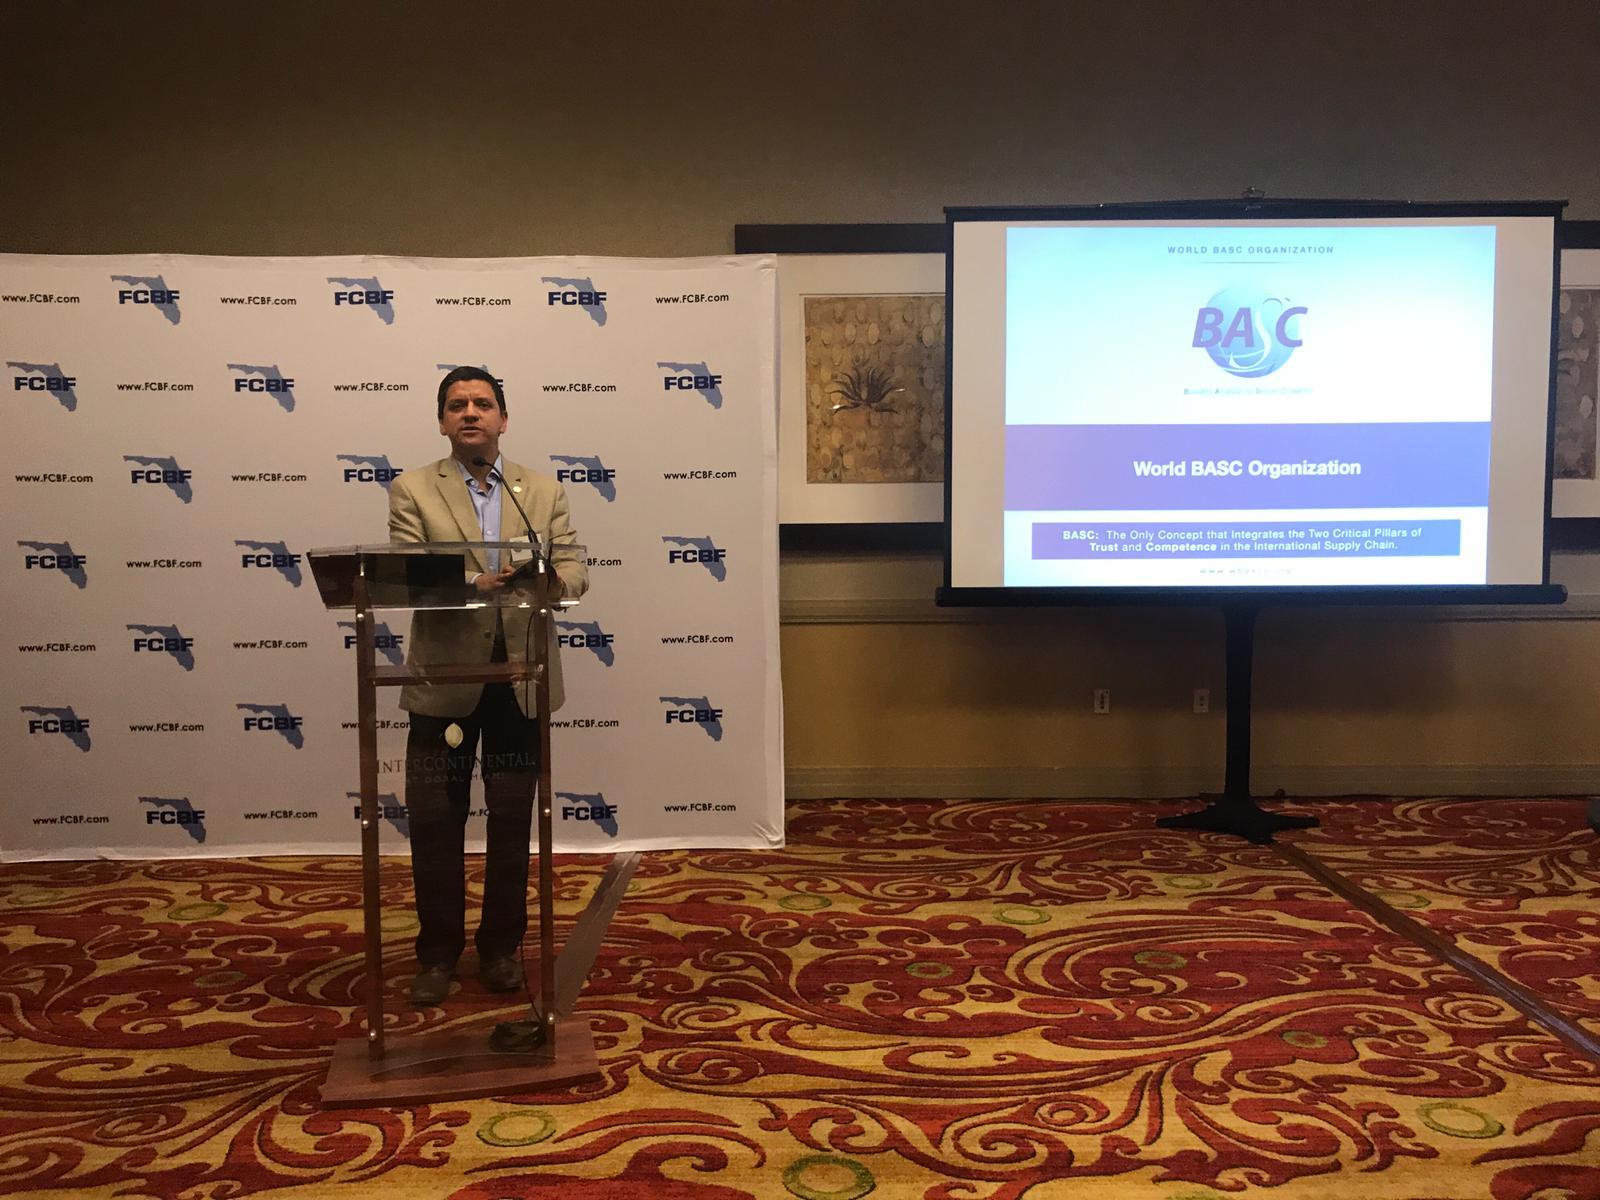 Moments during BASC's presentation to the audience, Manuel Echeverria, executive director of WBO.